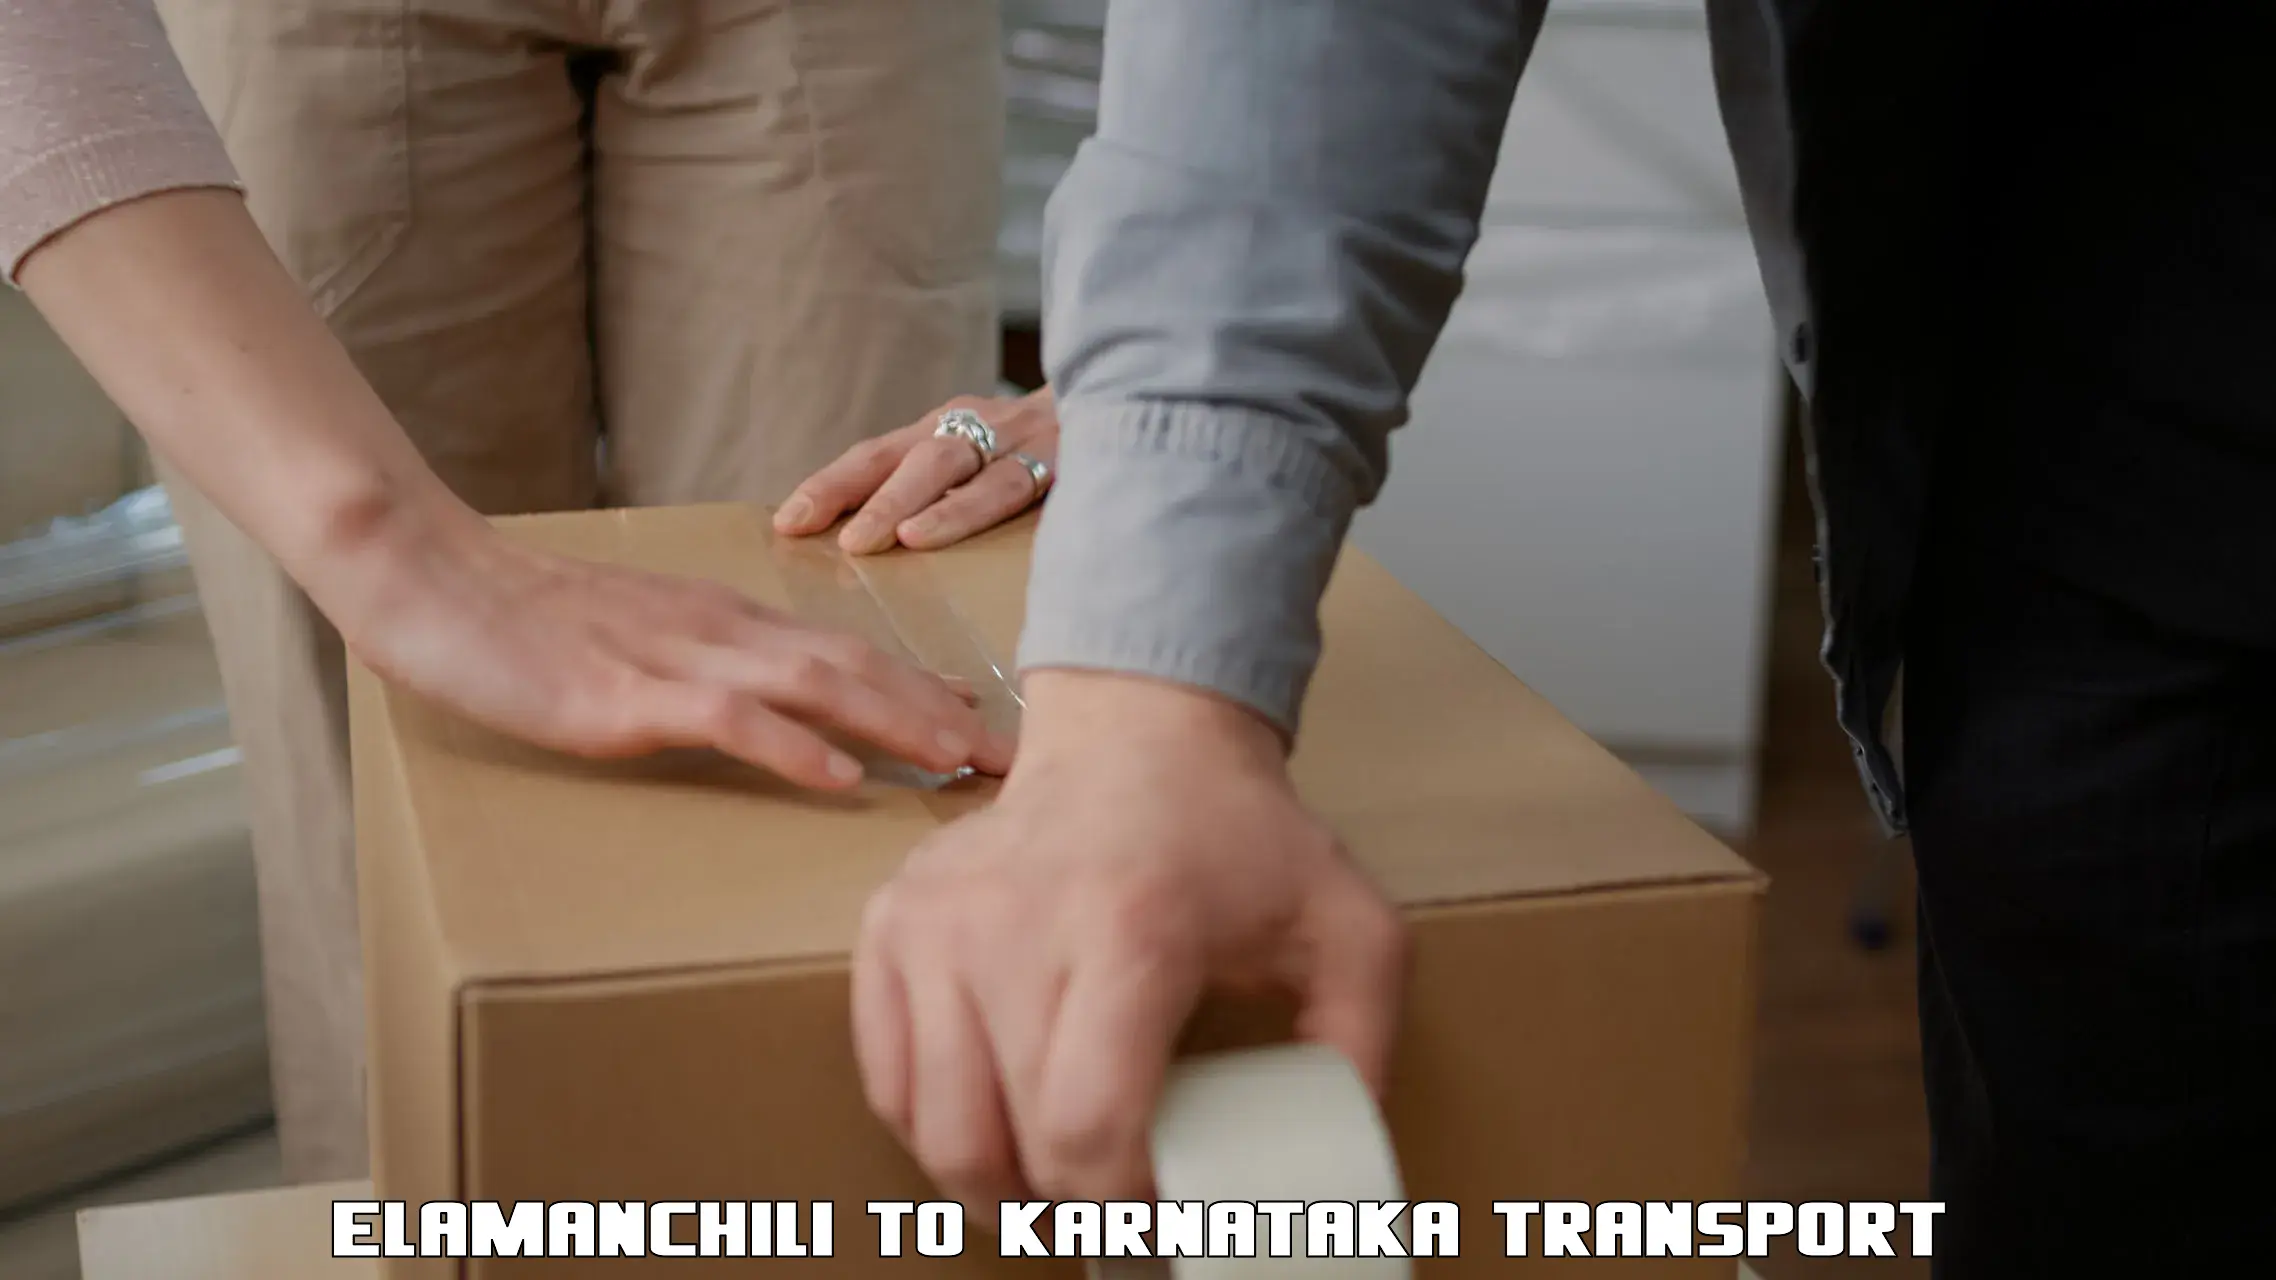 Delivery service Elamanchili to Manipal